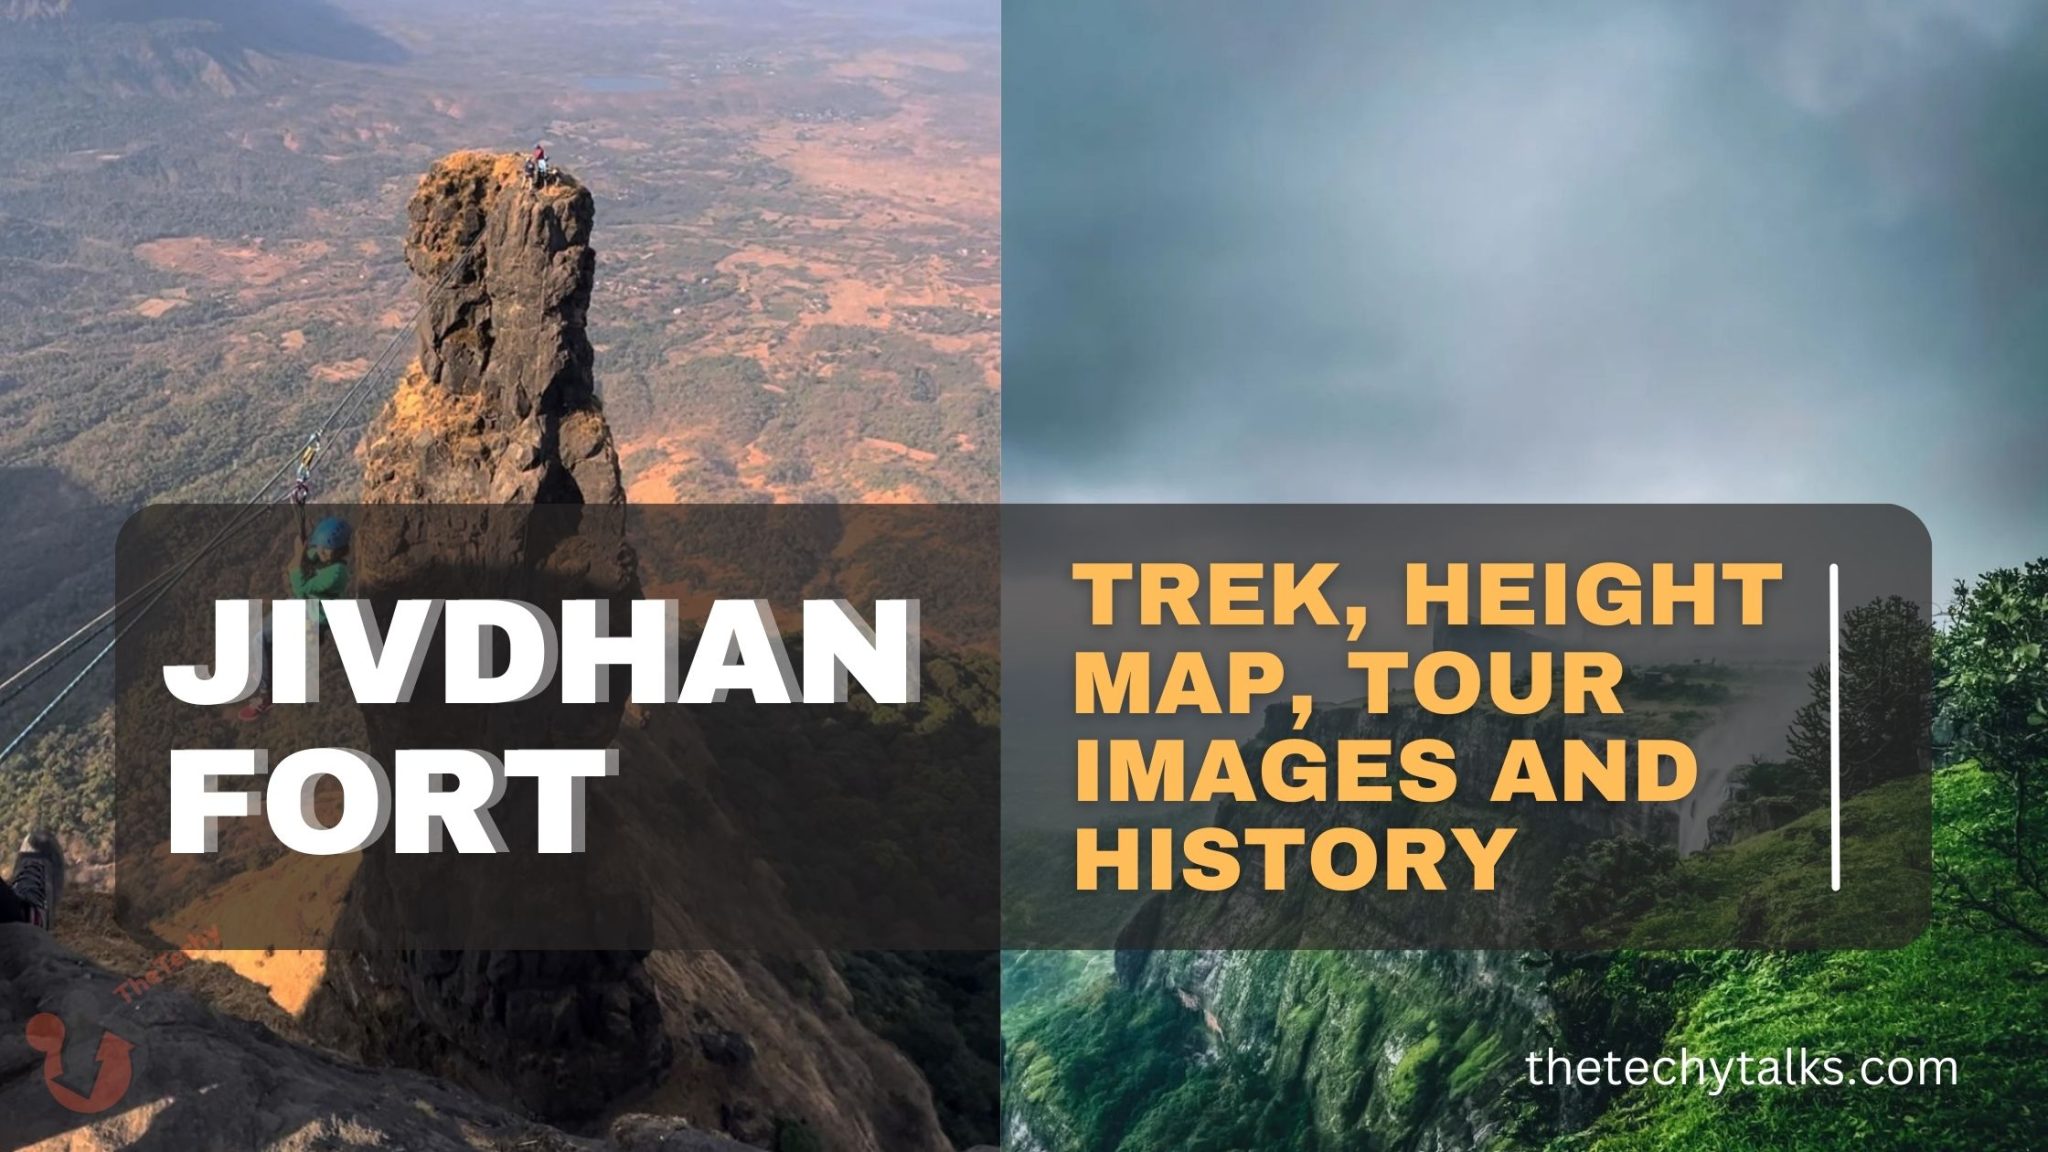 Jivdhan Fort: Trek, Height, Map, Tour, Images and History